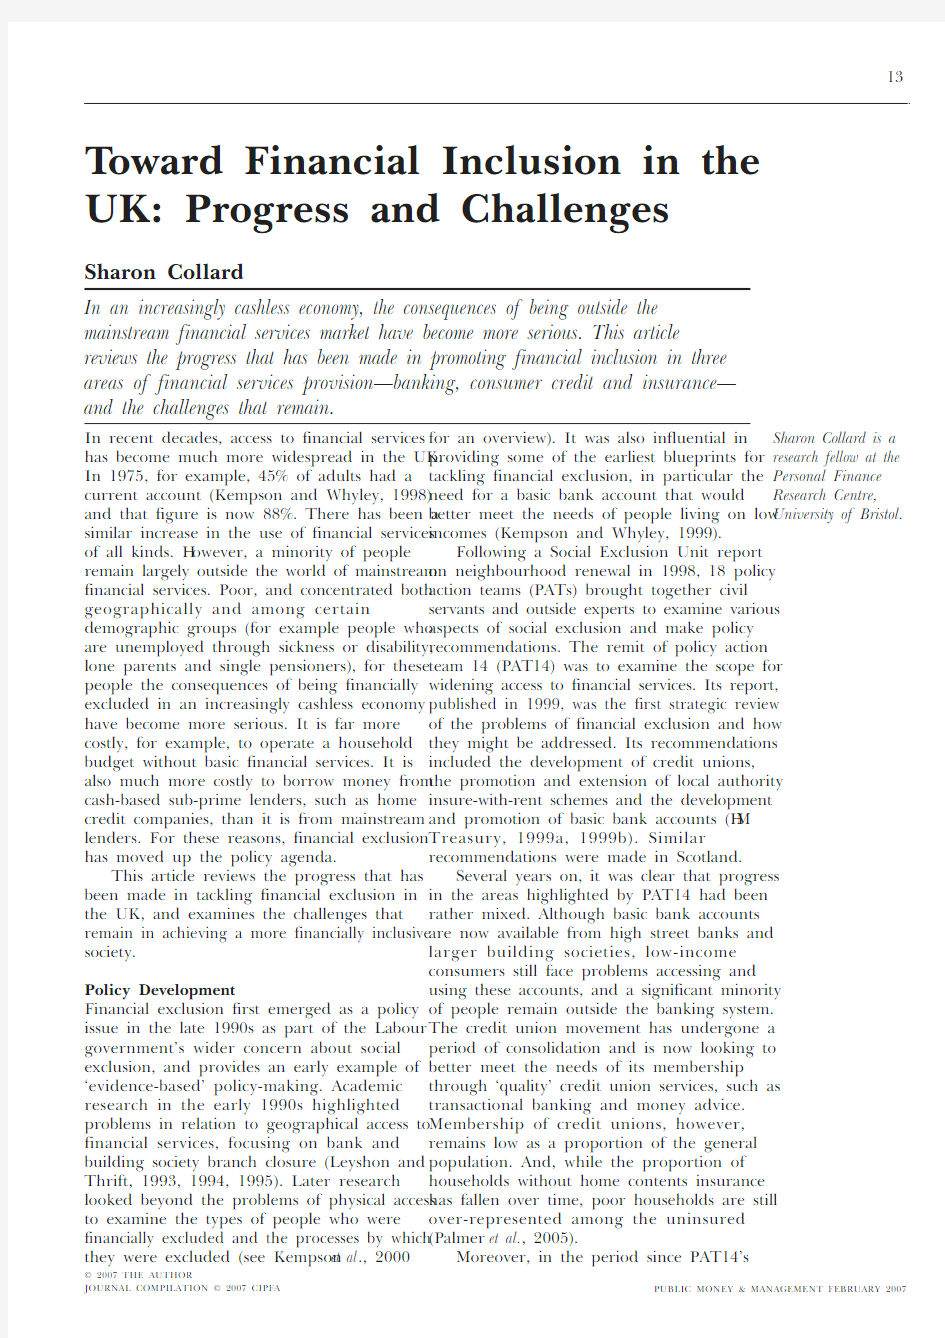 Toward financial inclusion in the UK Progress and challenges